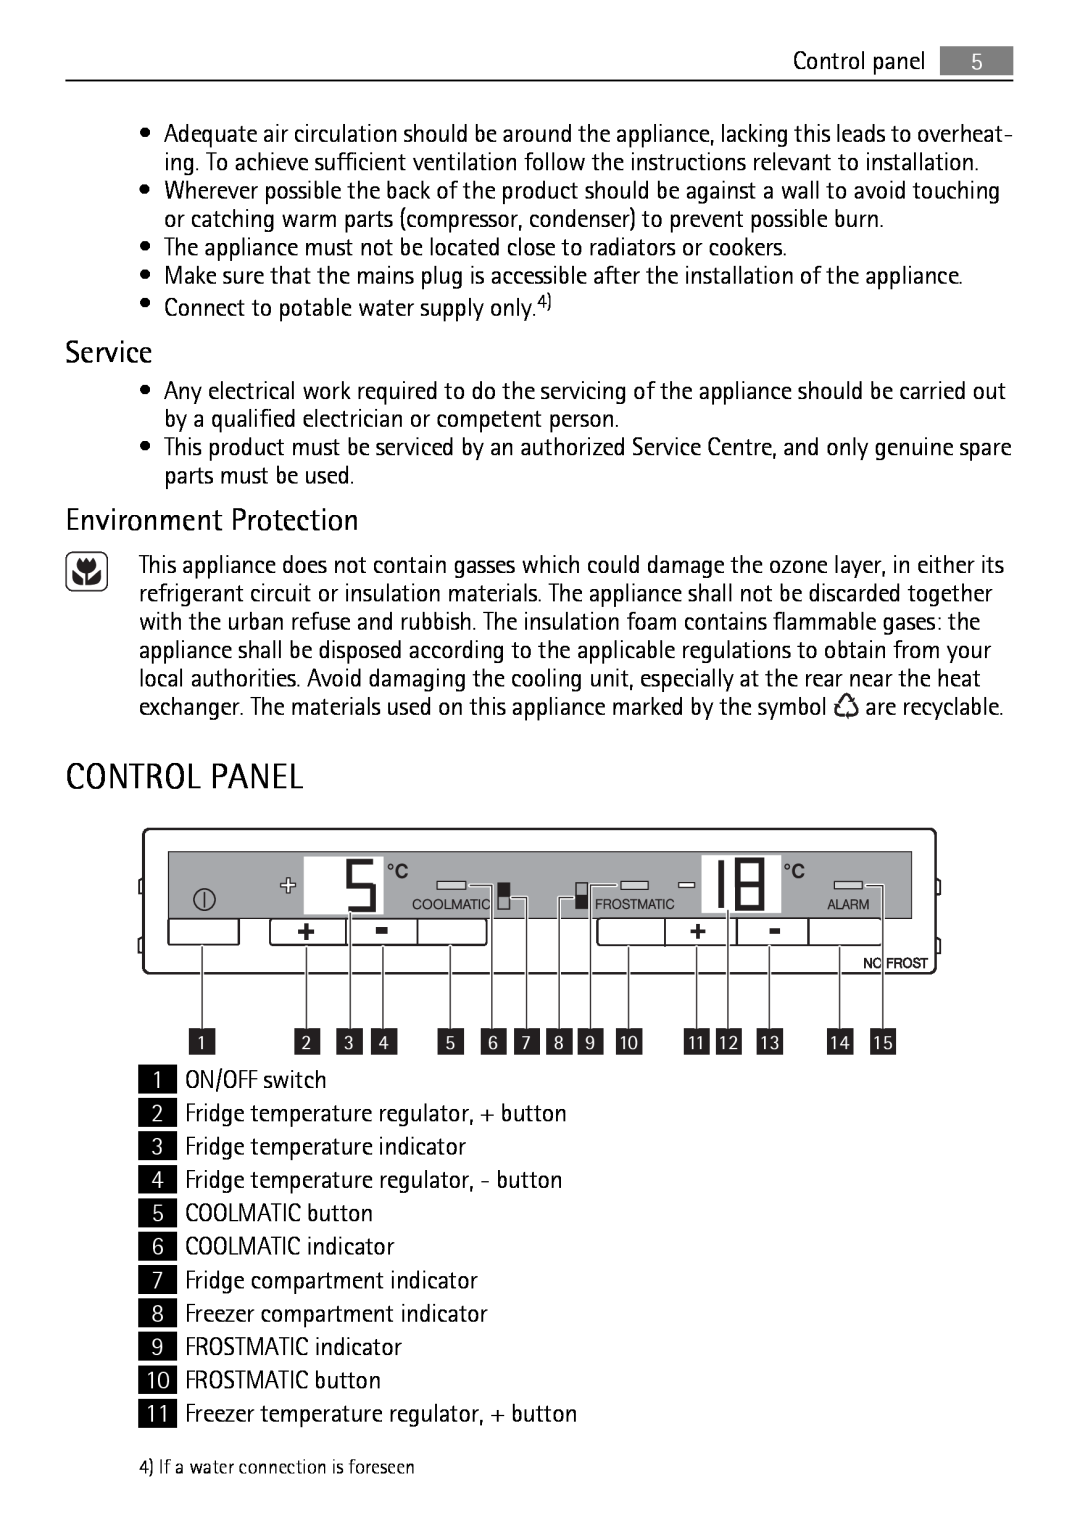 Electrolux 210621236-11052010, 925033134, S75348KG5 user manual Control Panel, Service, Environment Protection 